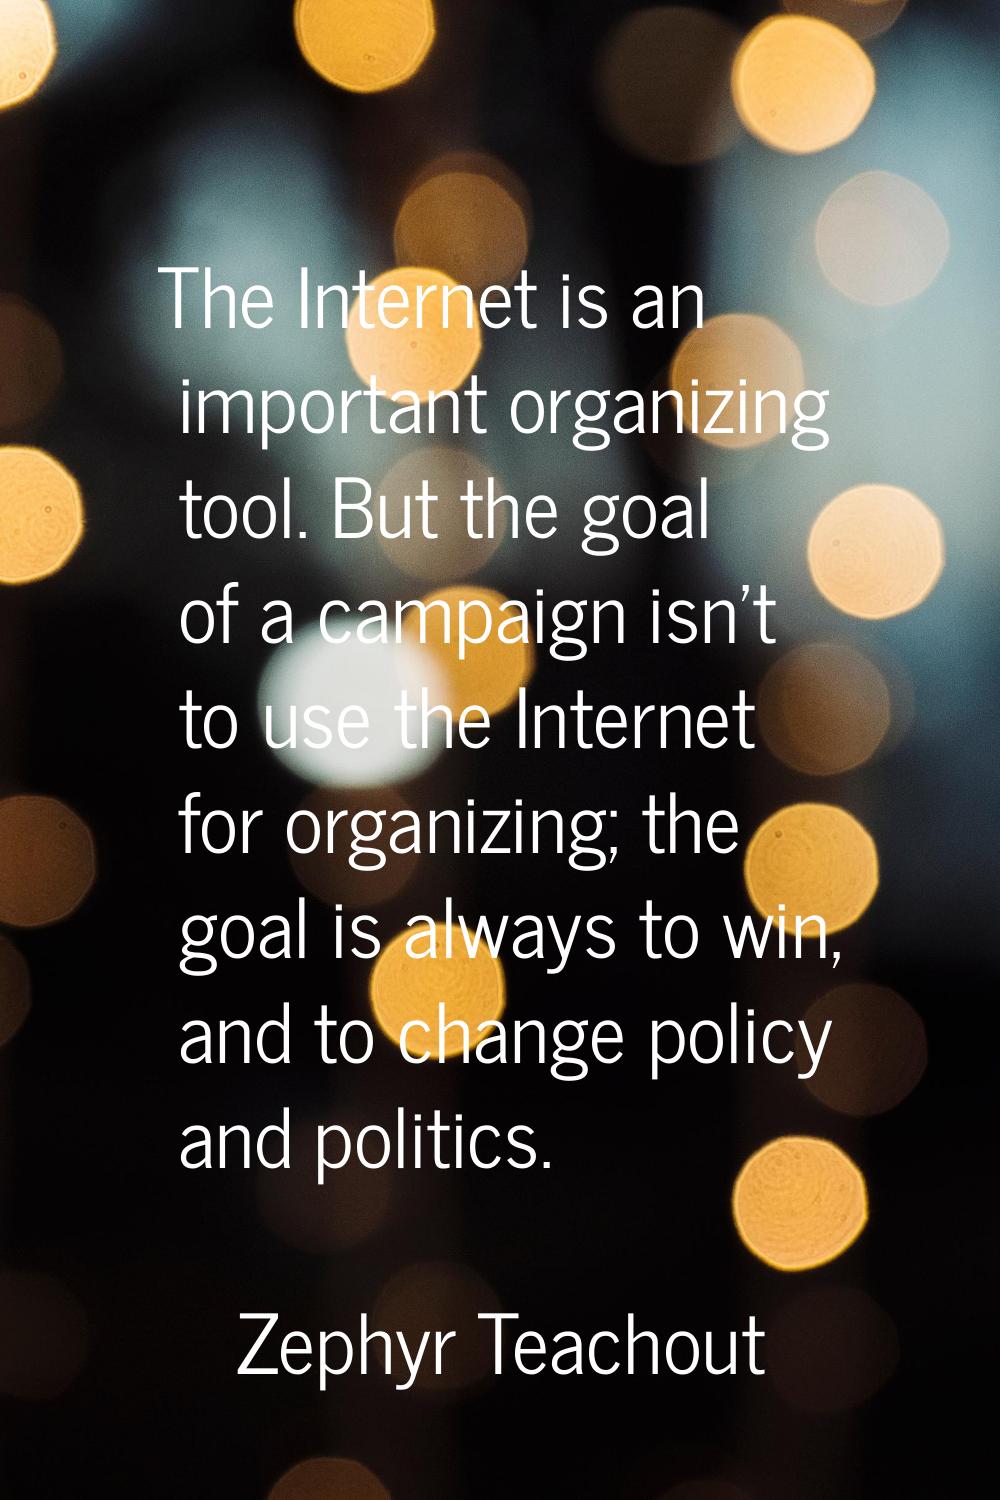 The Internet is an important organizing tool. But the goal of a campaign isn't to use the Internet 